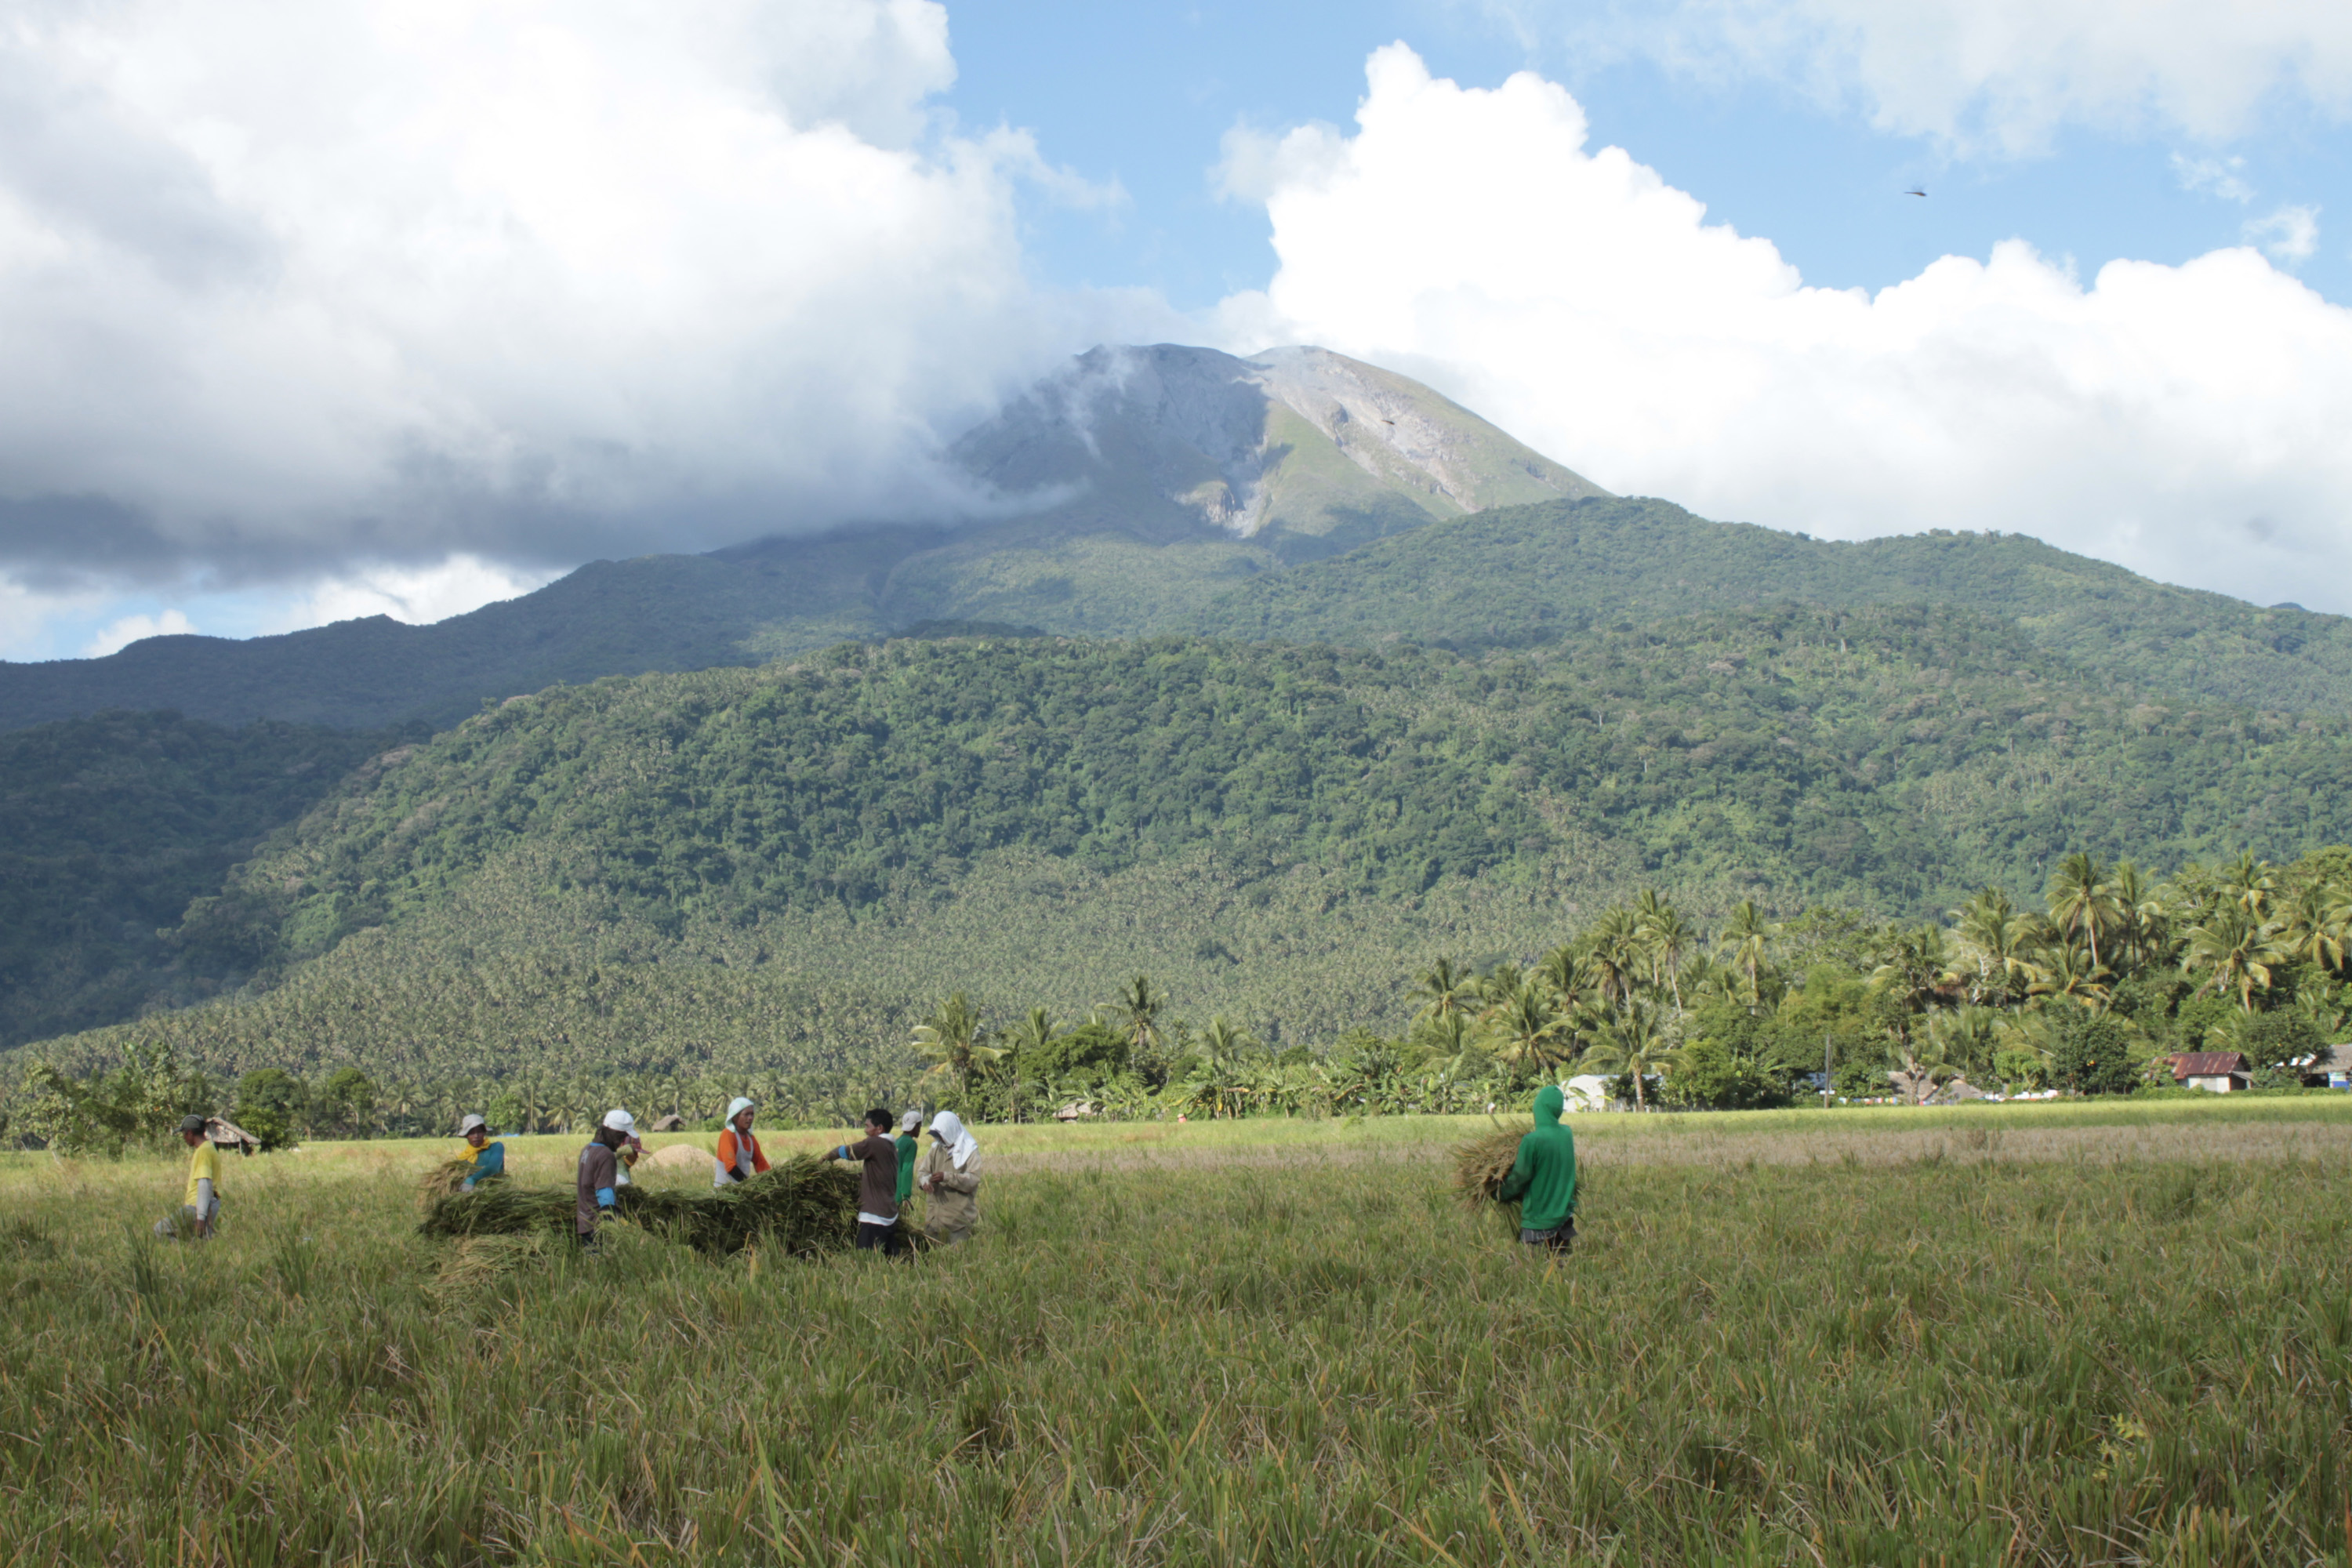 FAST FACTS: Mt Bulusan, the PH's 4th most active volcano